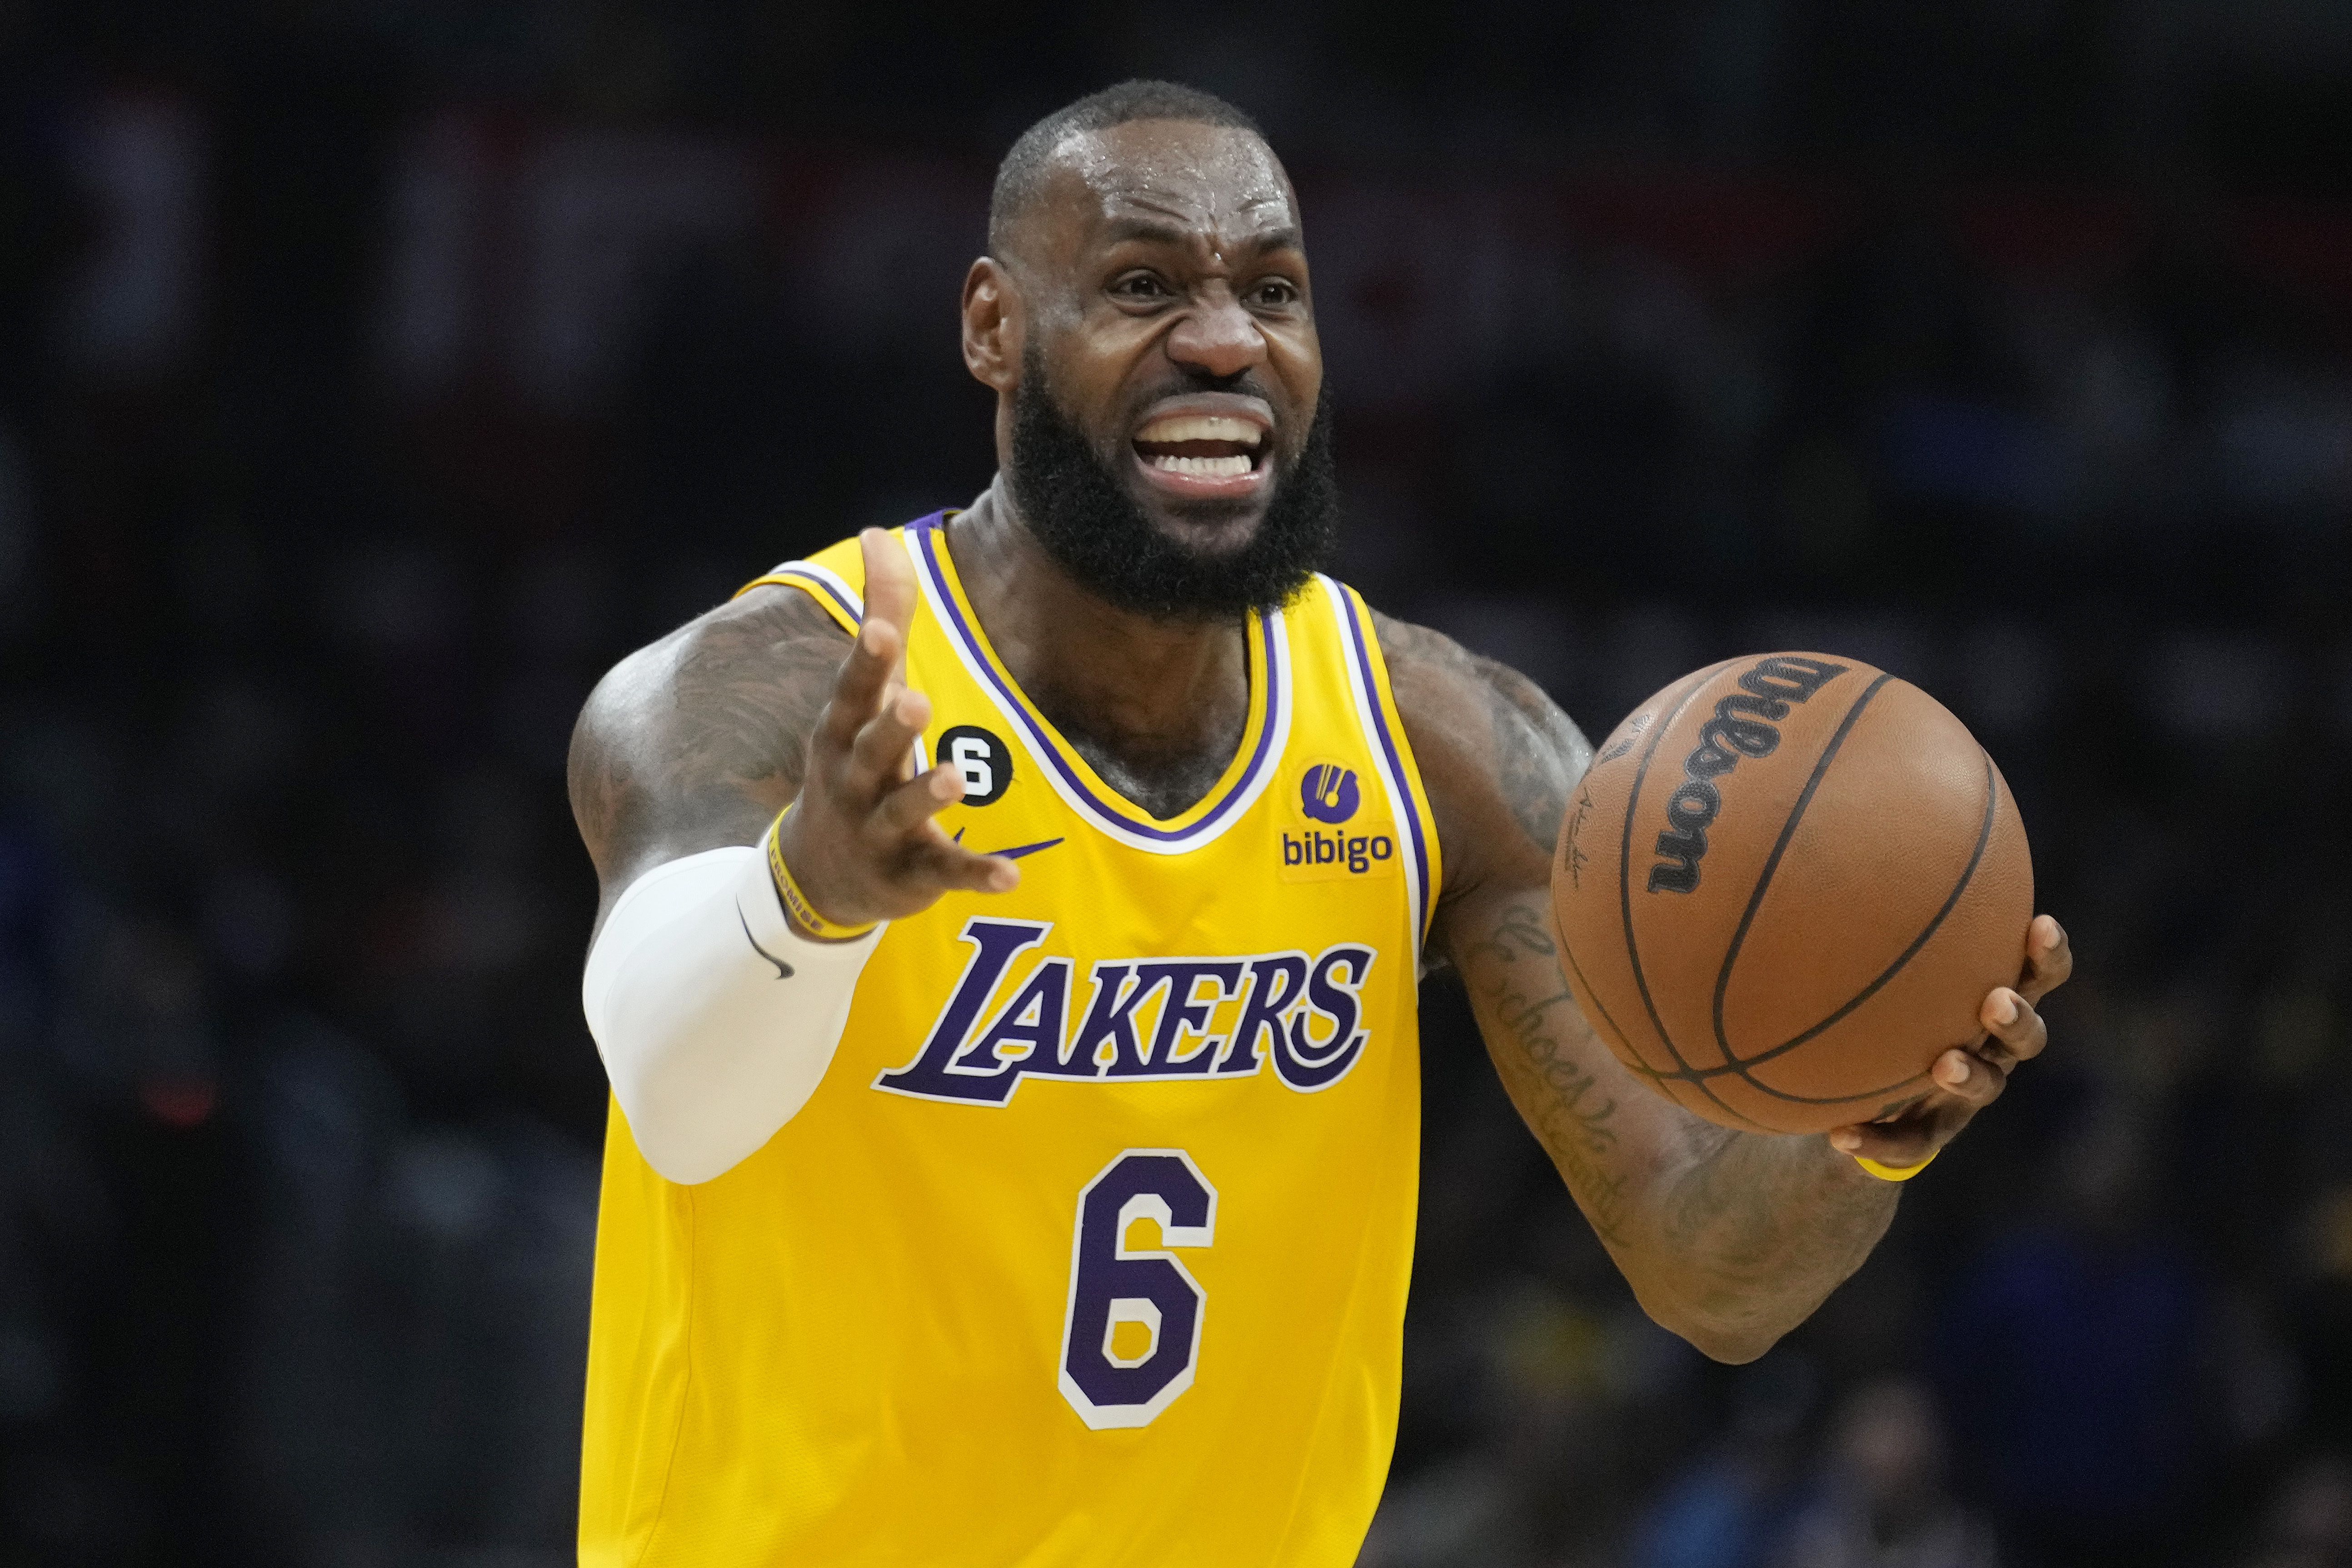 lakers timberwolves live stream